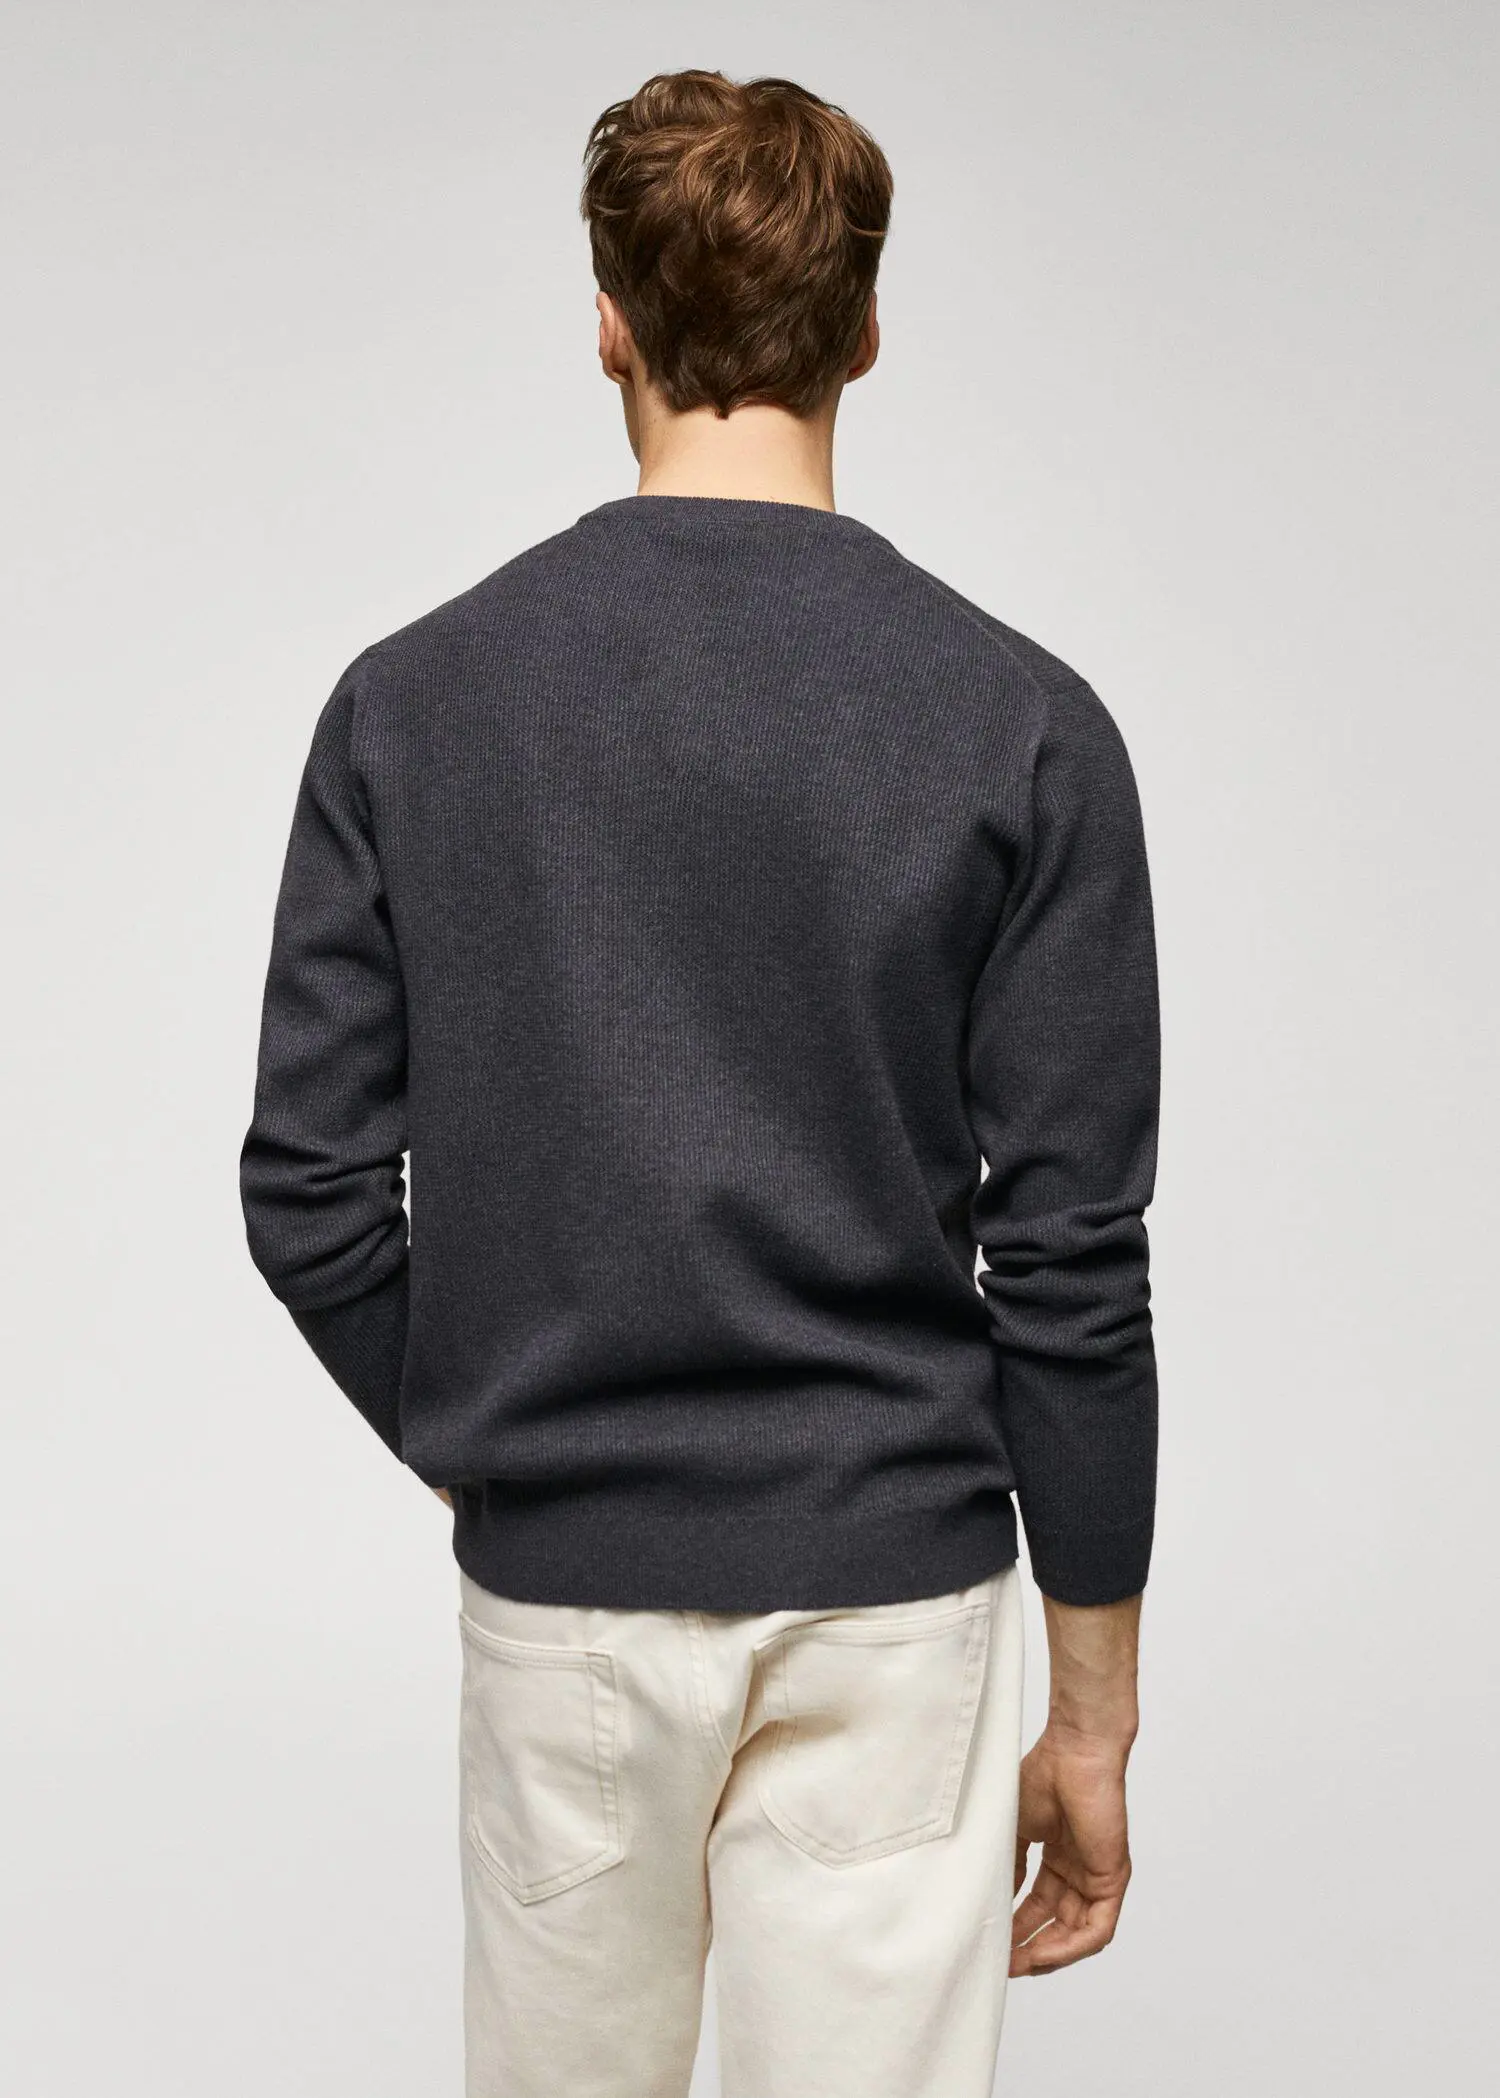 Mango Structured cotton sweater. a man wearing a black sweater and white pants. 